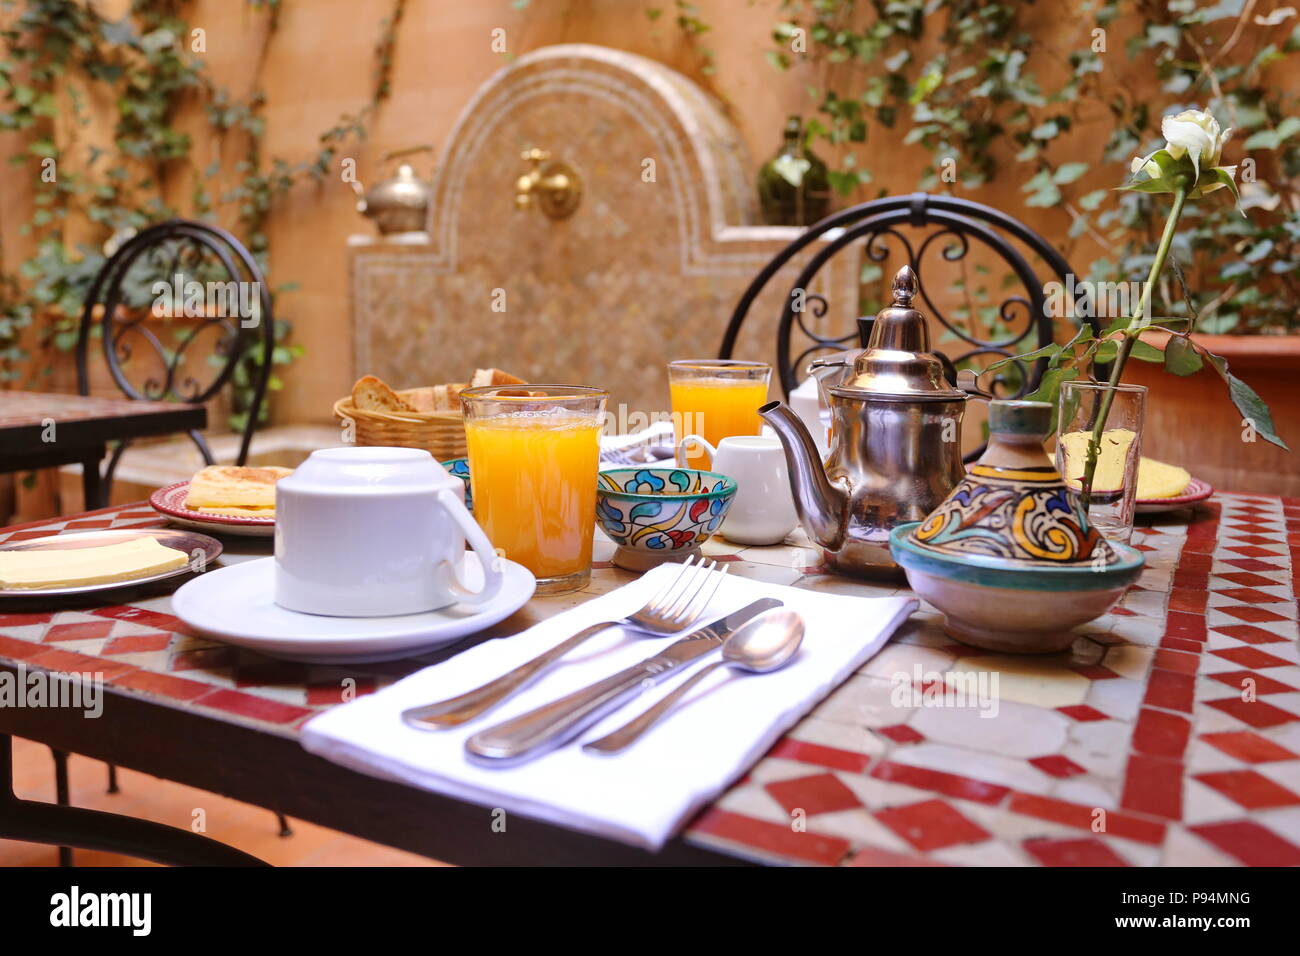 Delicious breakfast in Moroccan style served in riad (traditional Moroccan hotel) Stock Photo